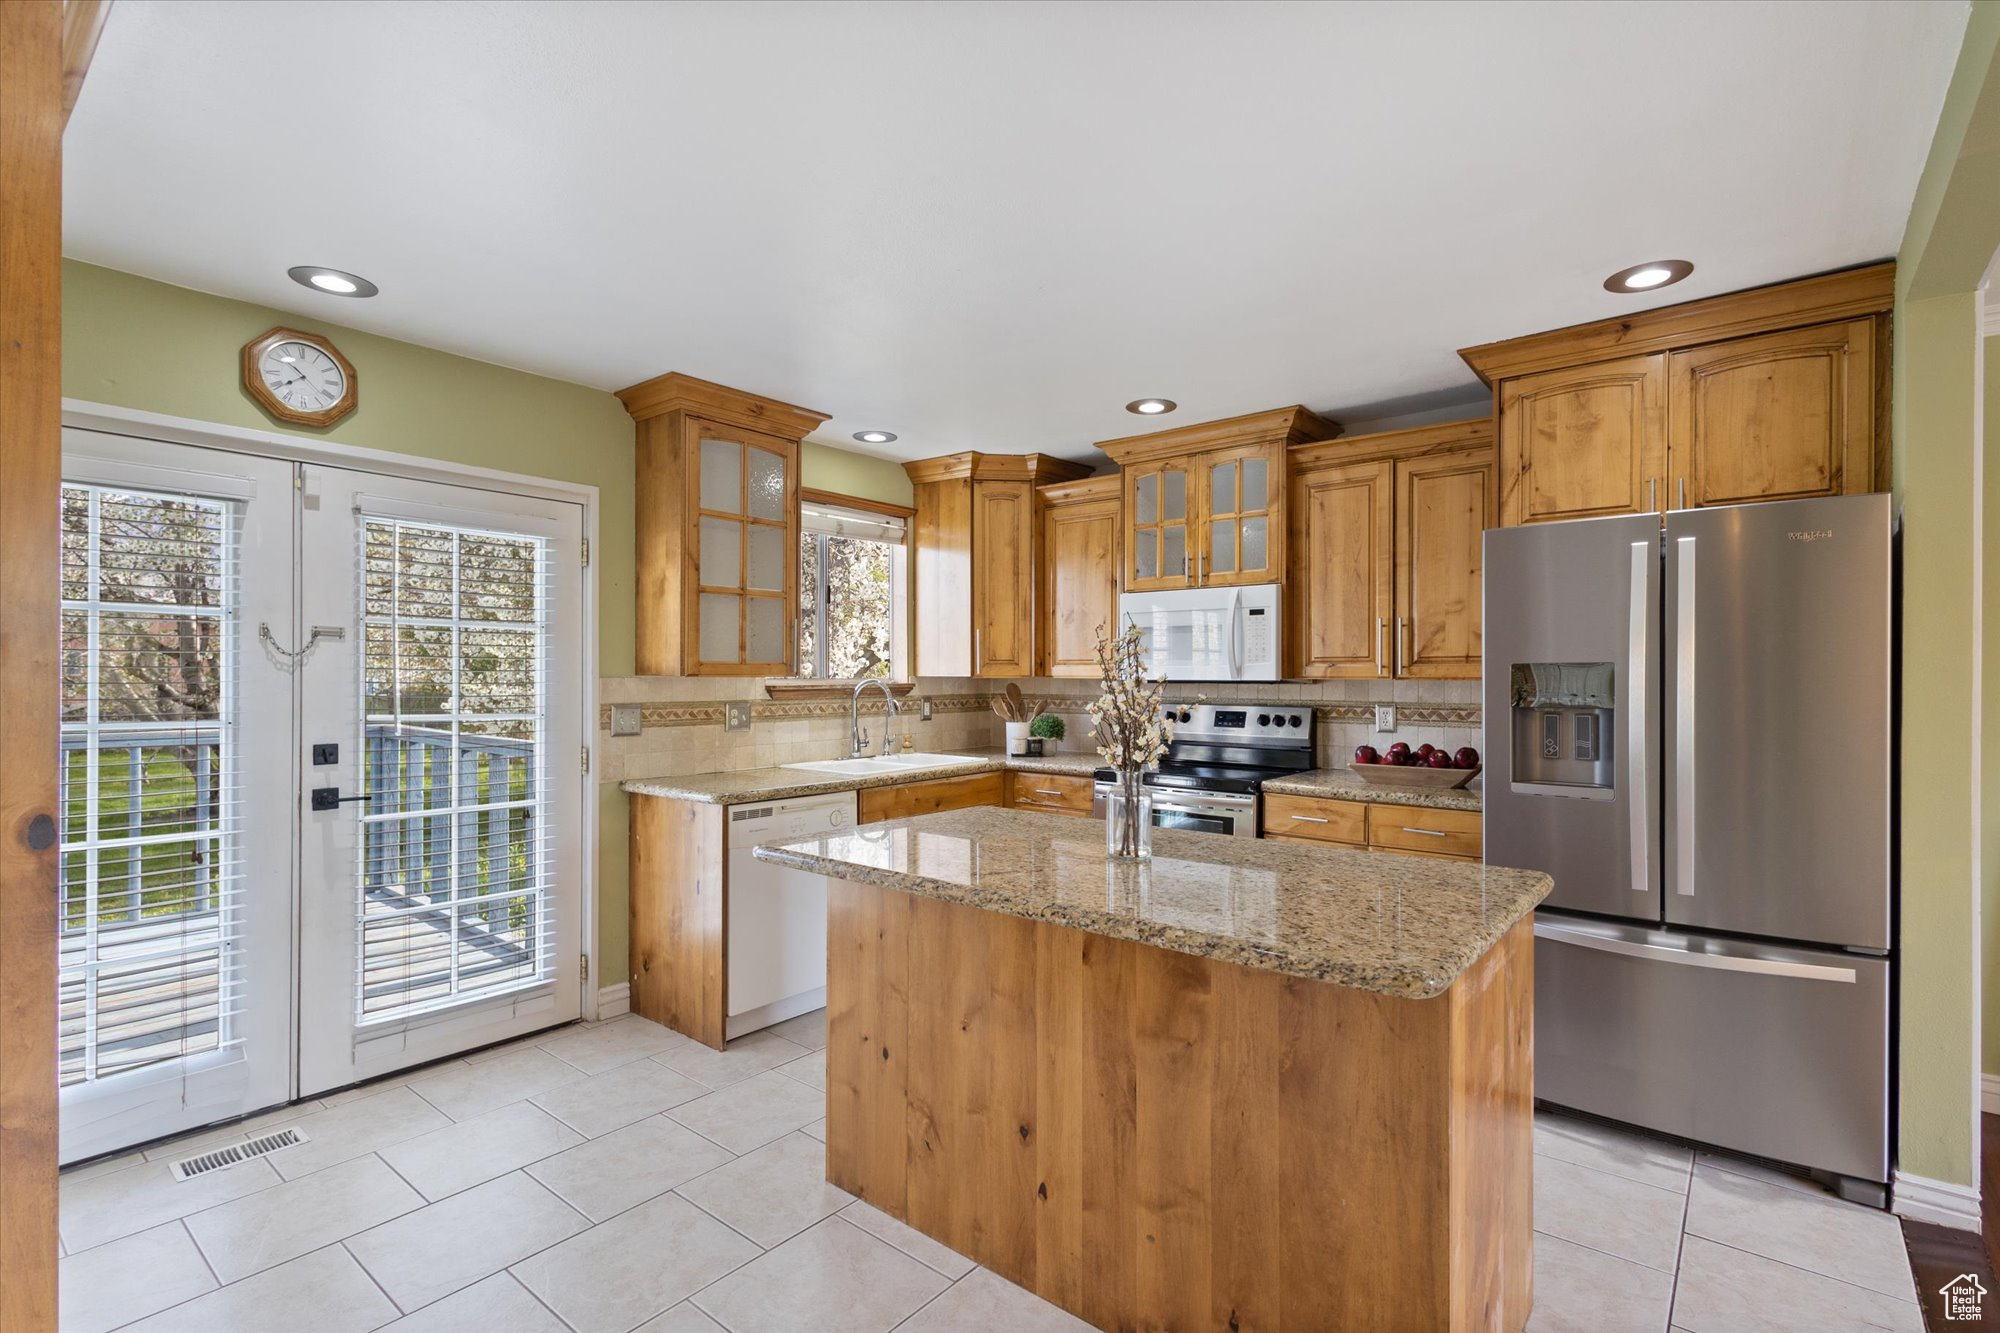 Kitchen with appliances with stainless steel finishes, backsplash, plenty of natural light